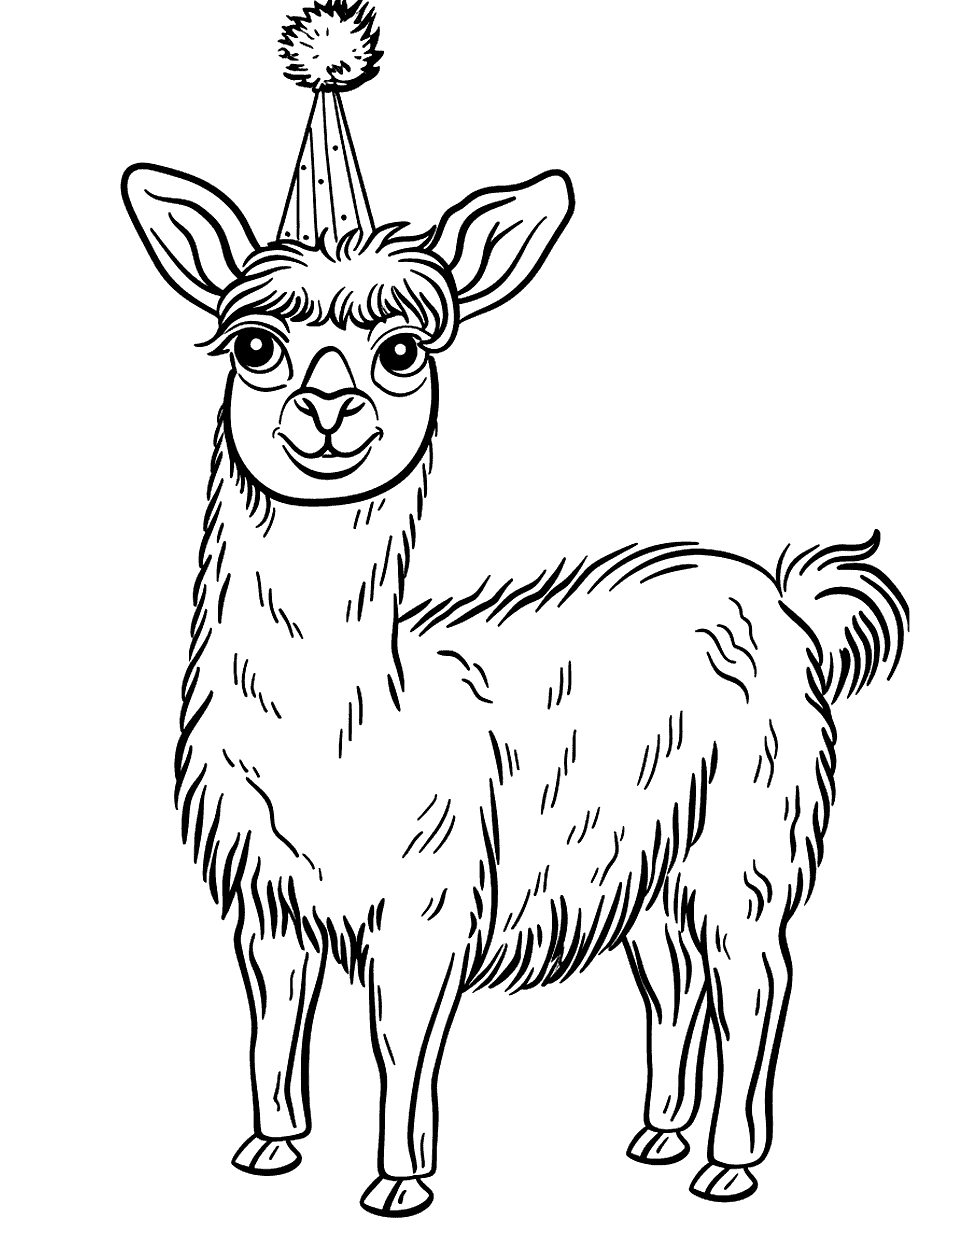 Llama with a Party Hat Coloring Page - A happy llama wearing a party hat.